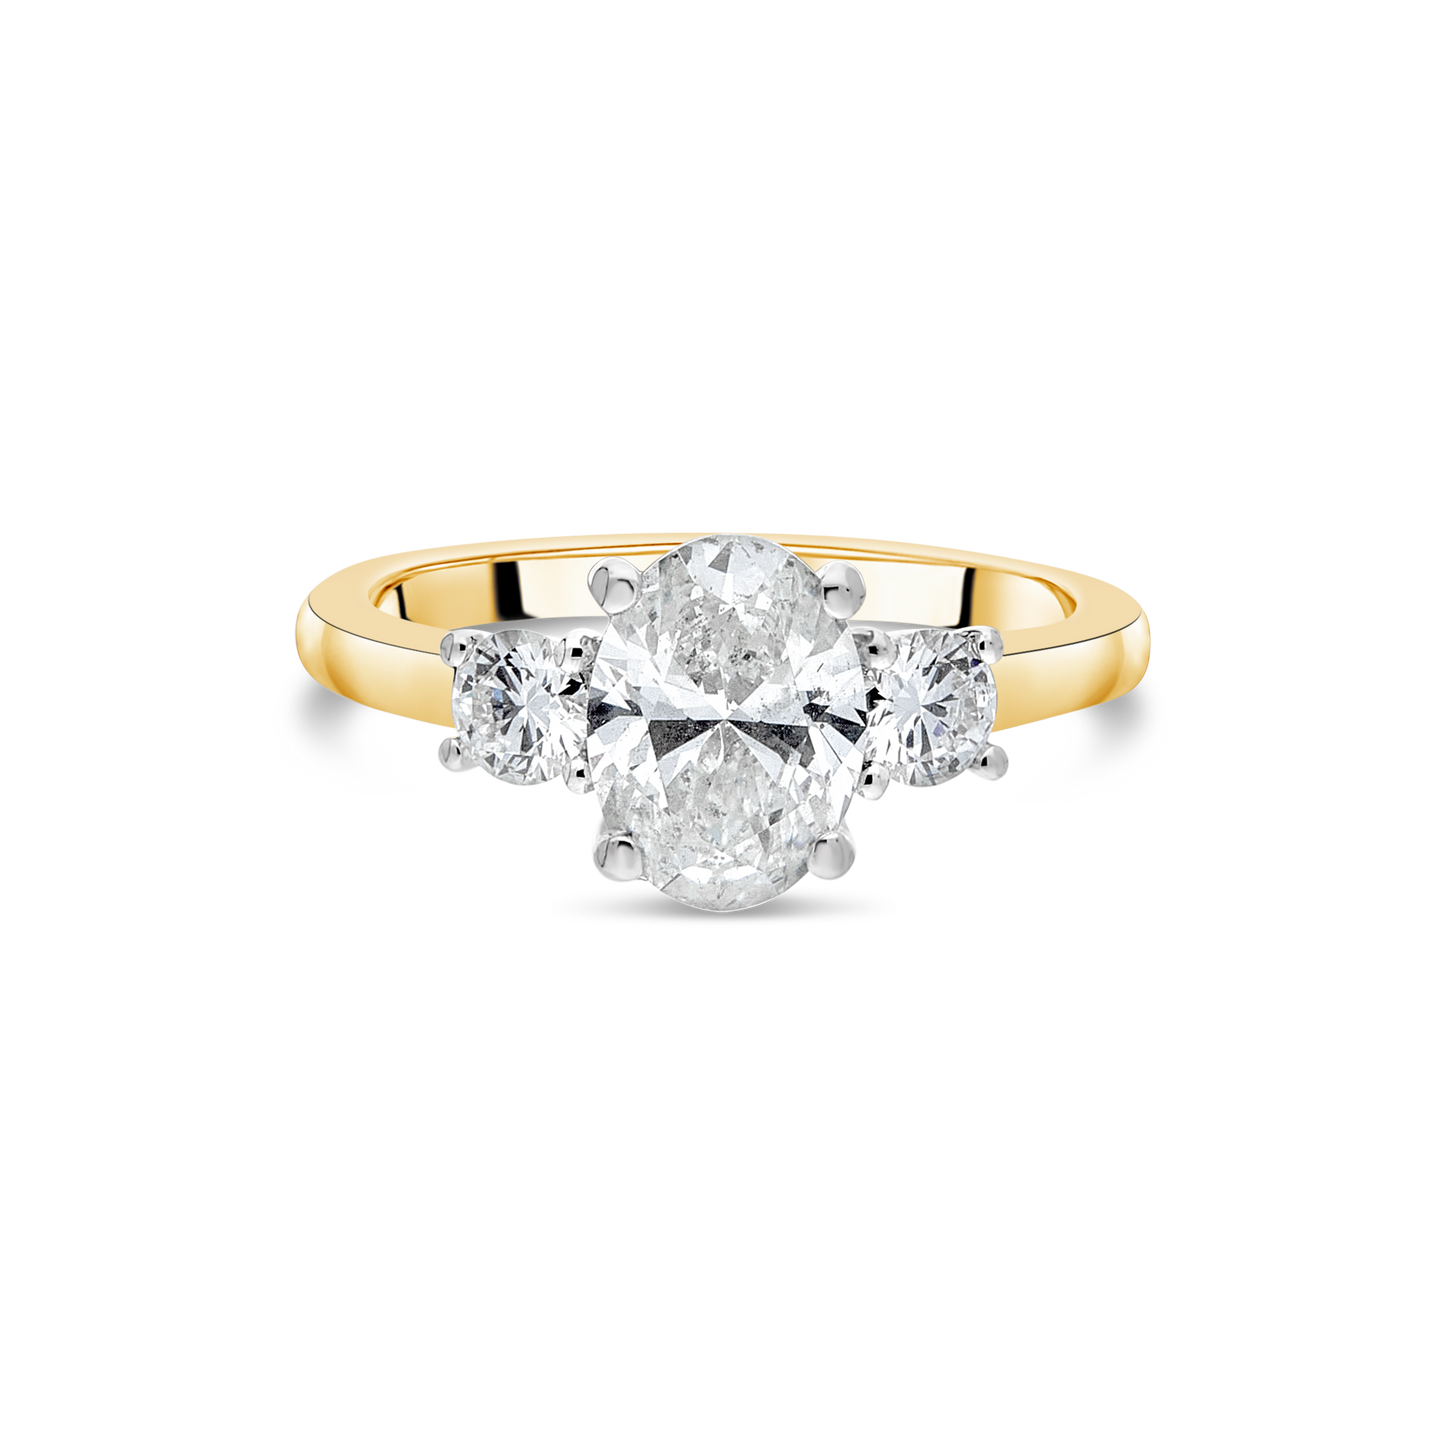 The "Tulip" with Oval Diamond, Yellow Gold